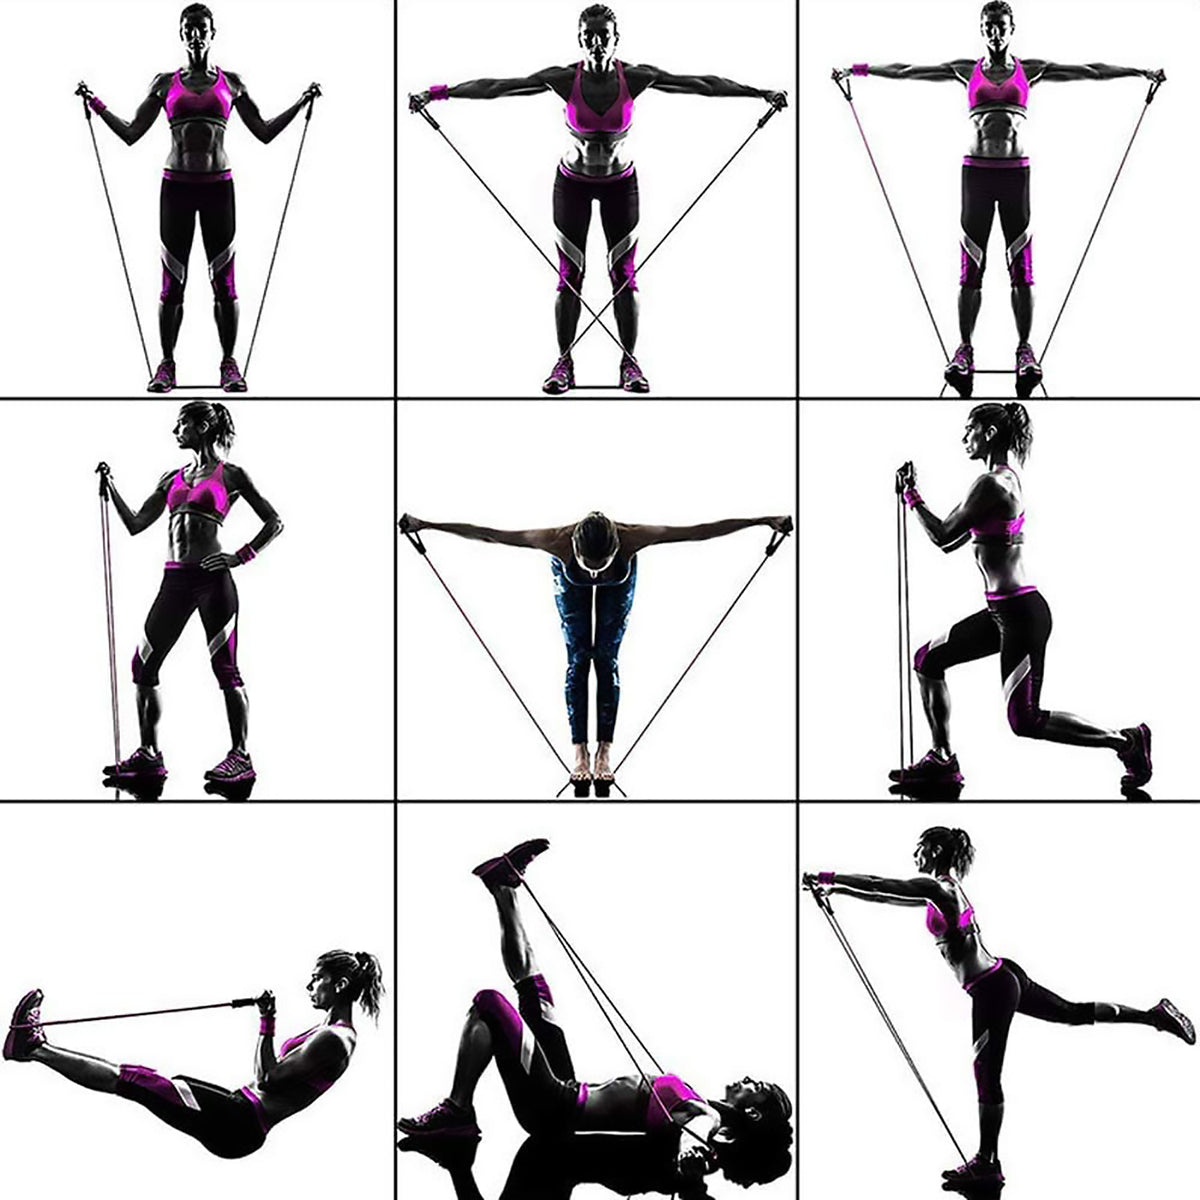 Example of 9 exercises with the resistance tube bands.